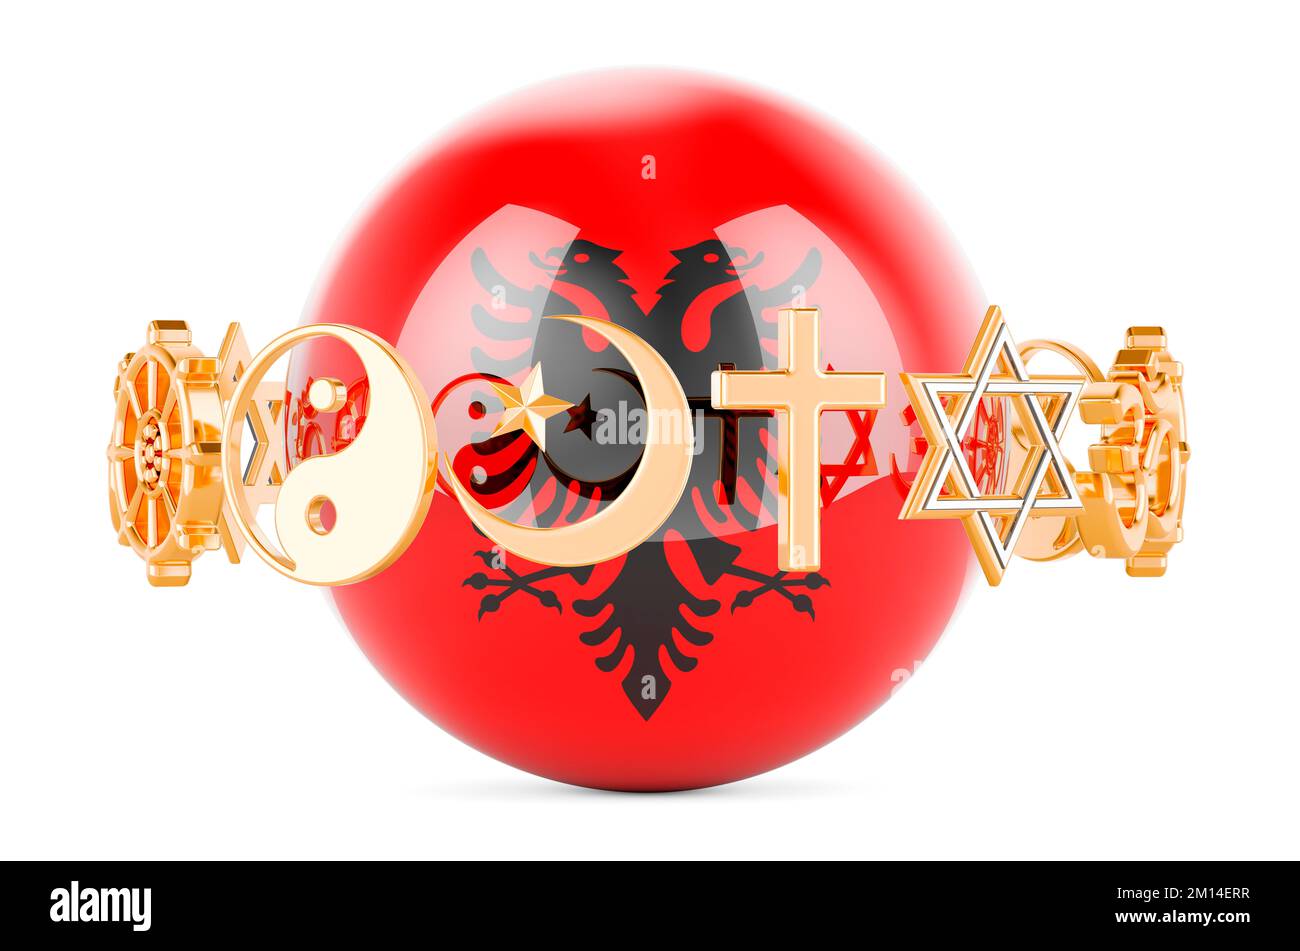 Albanian flag painted on sphere with religions symbols around, 3D rendering isolated on white background Stock Photo